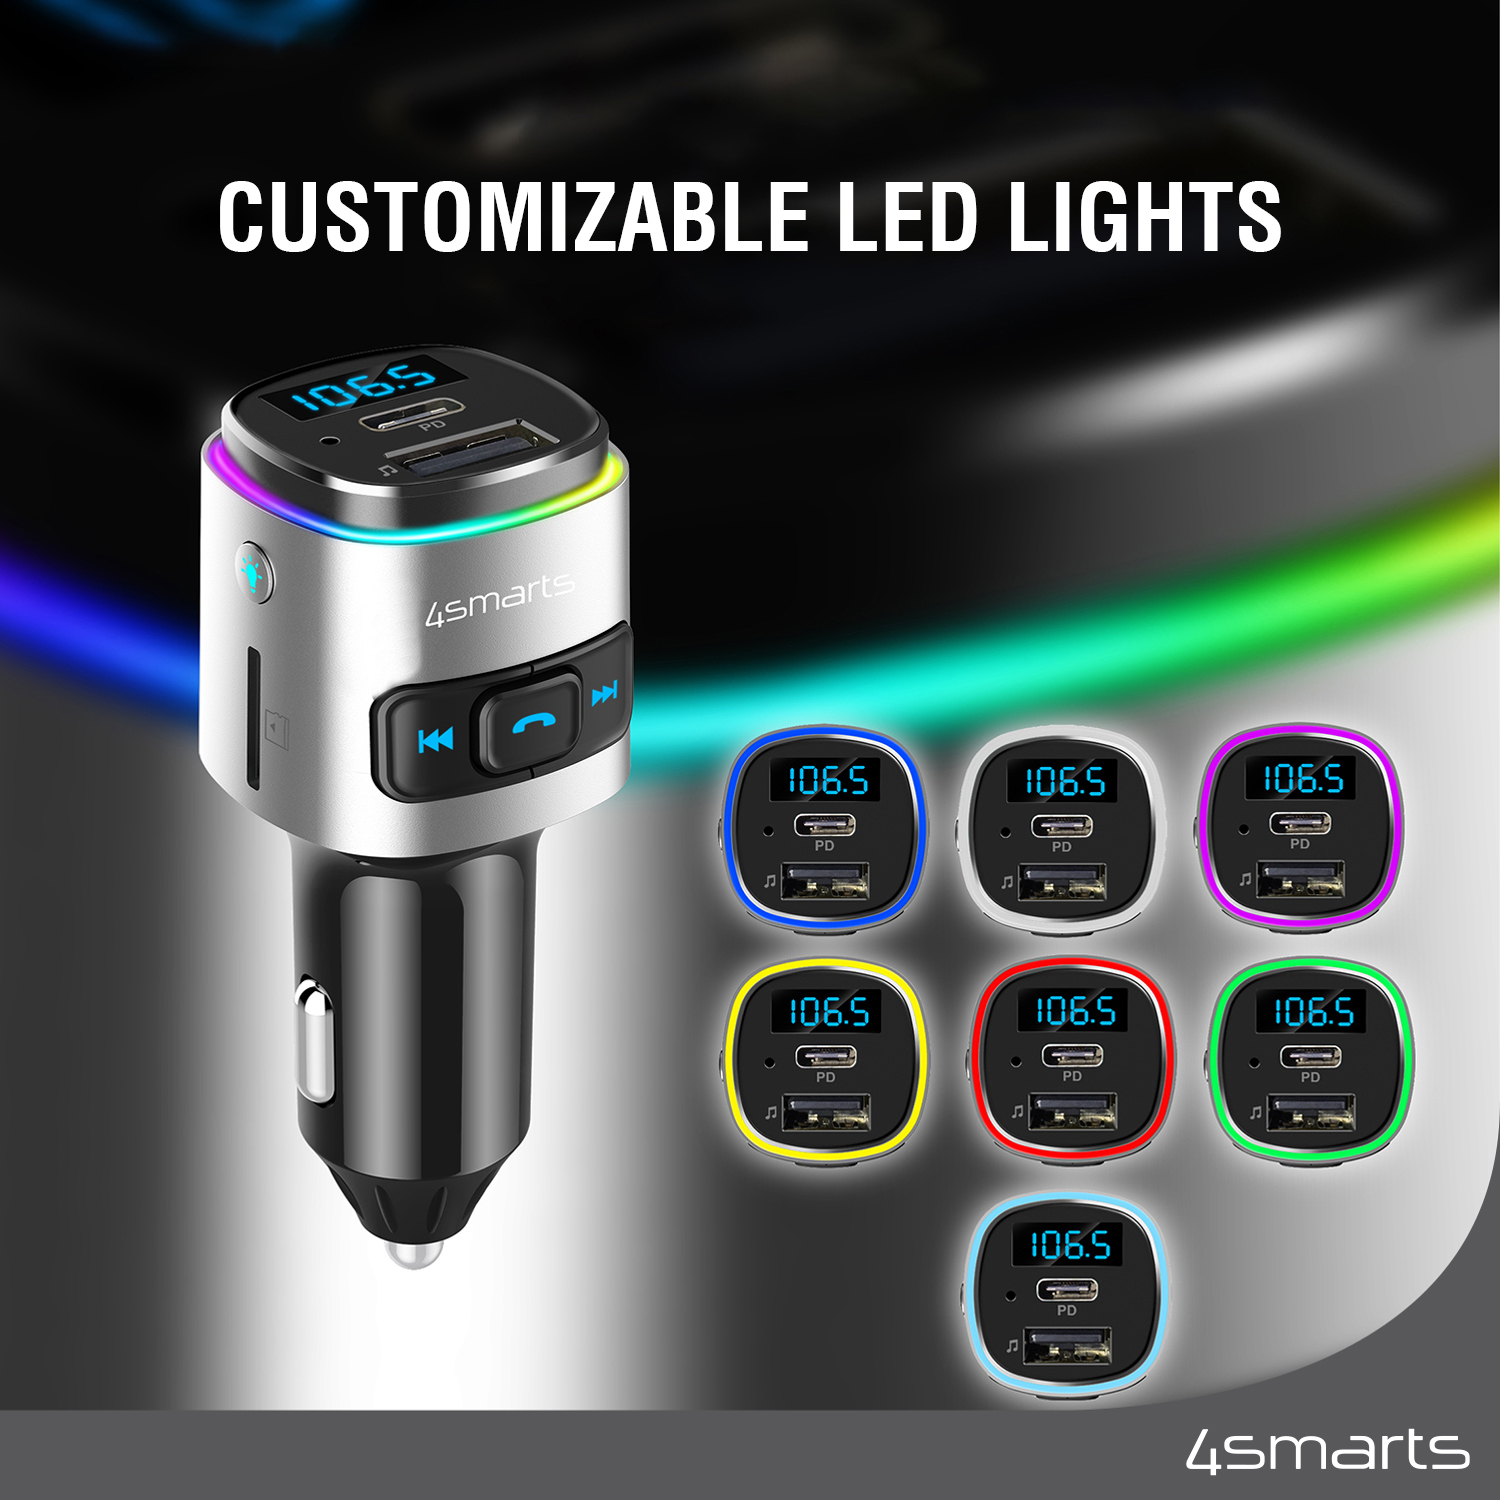 The 4smarts Media&Assist 2 Bluetooth Car Adapter offers 7 adjustable LED colors to choose from.